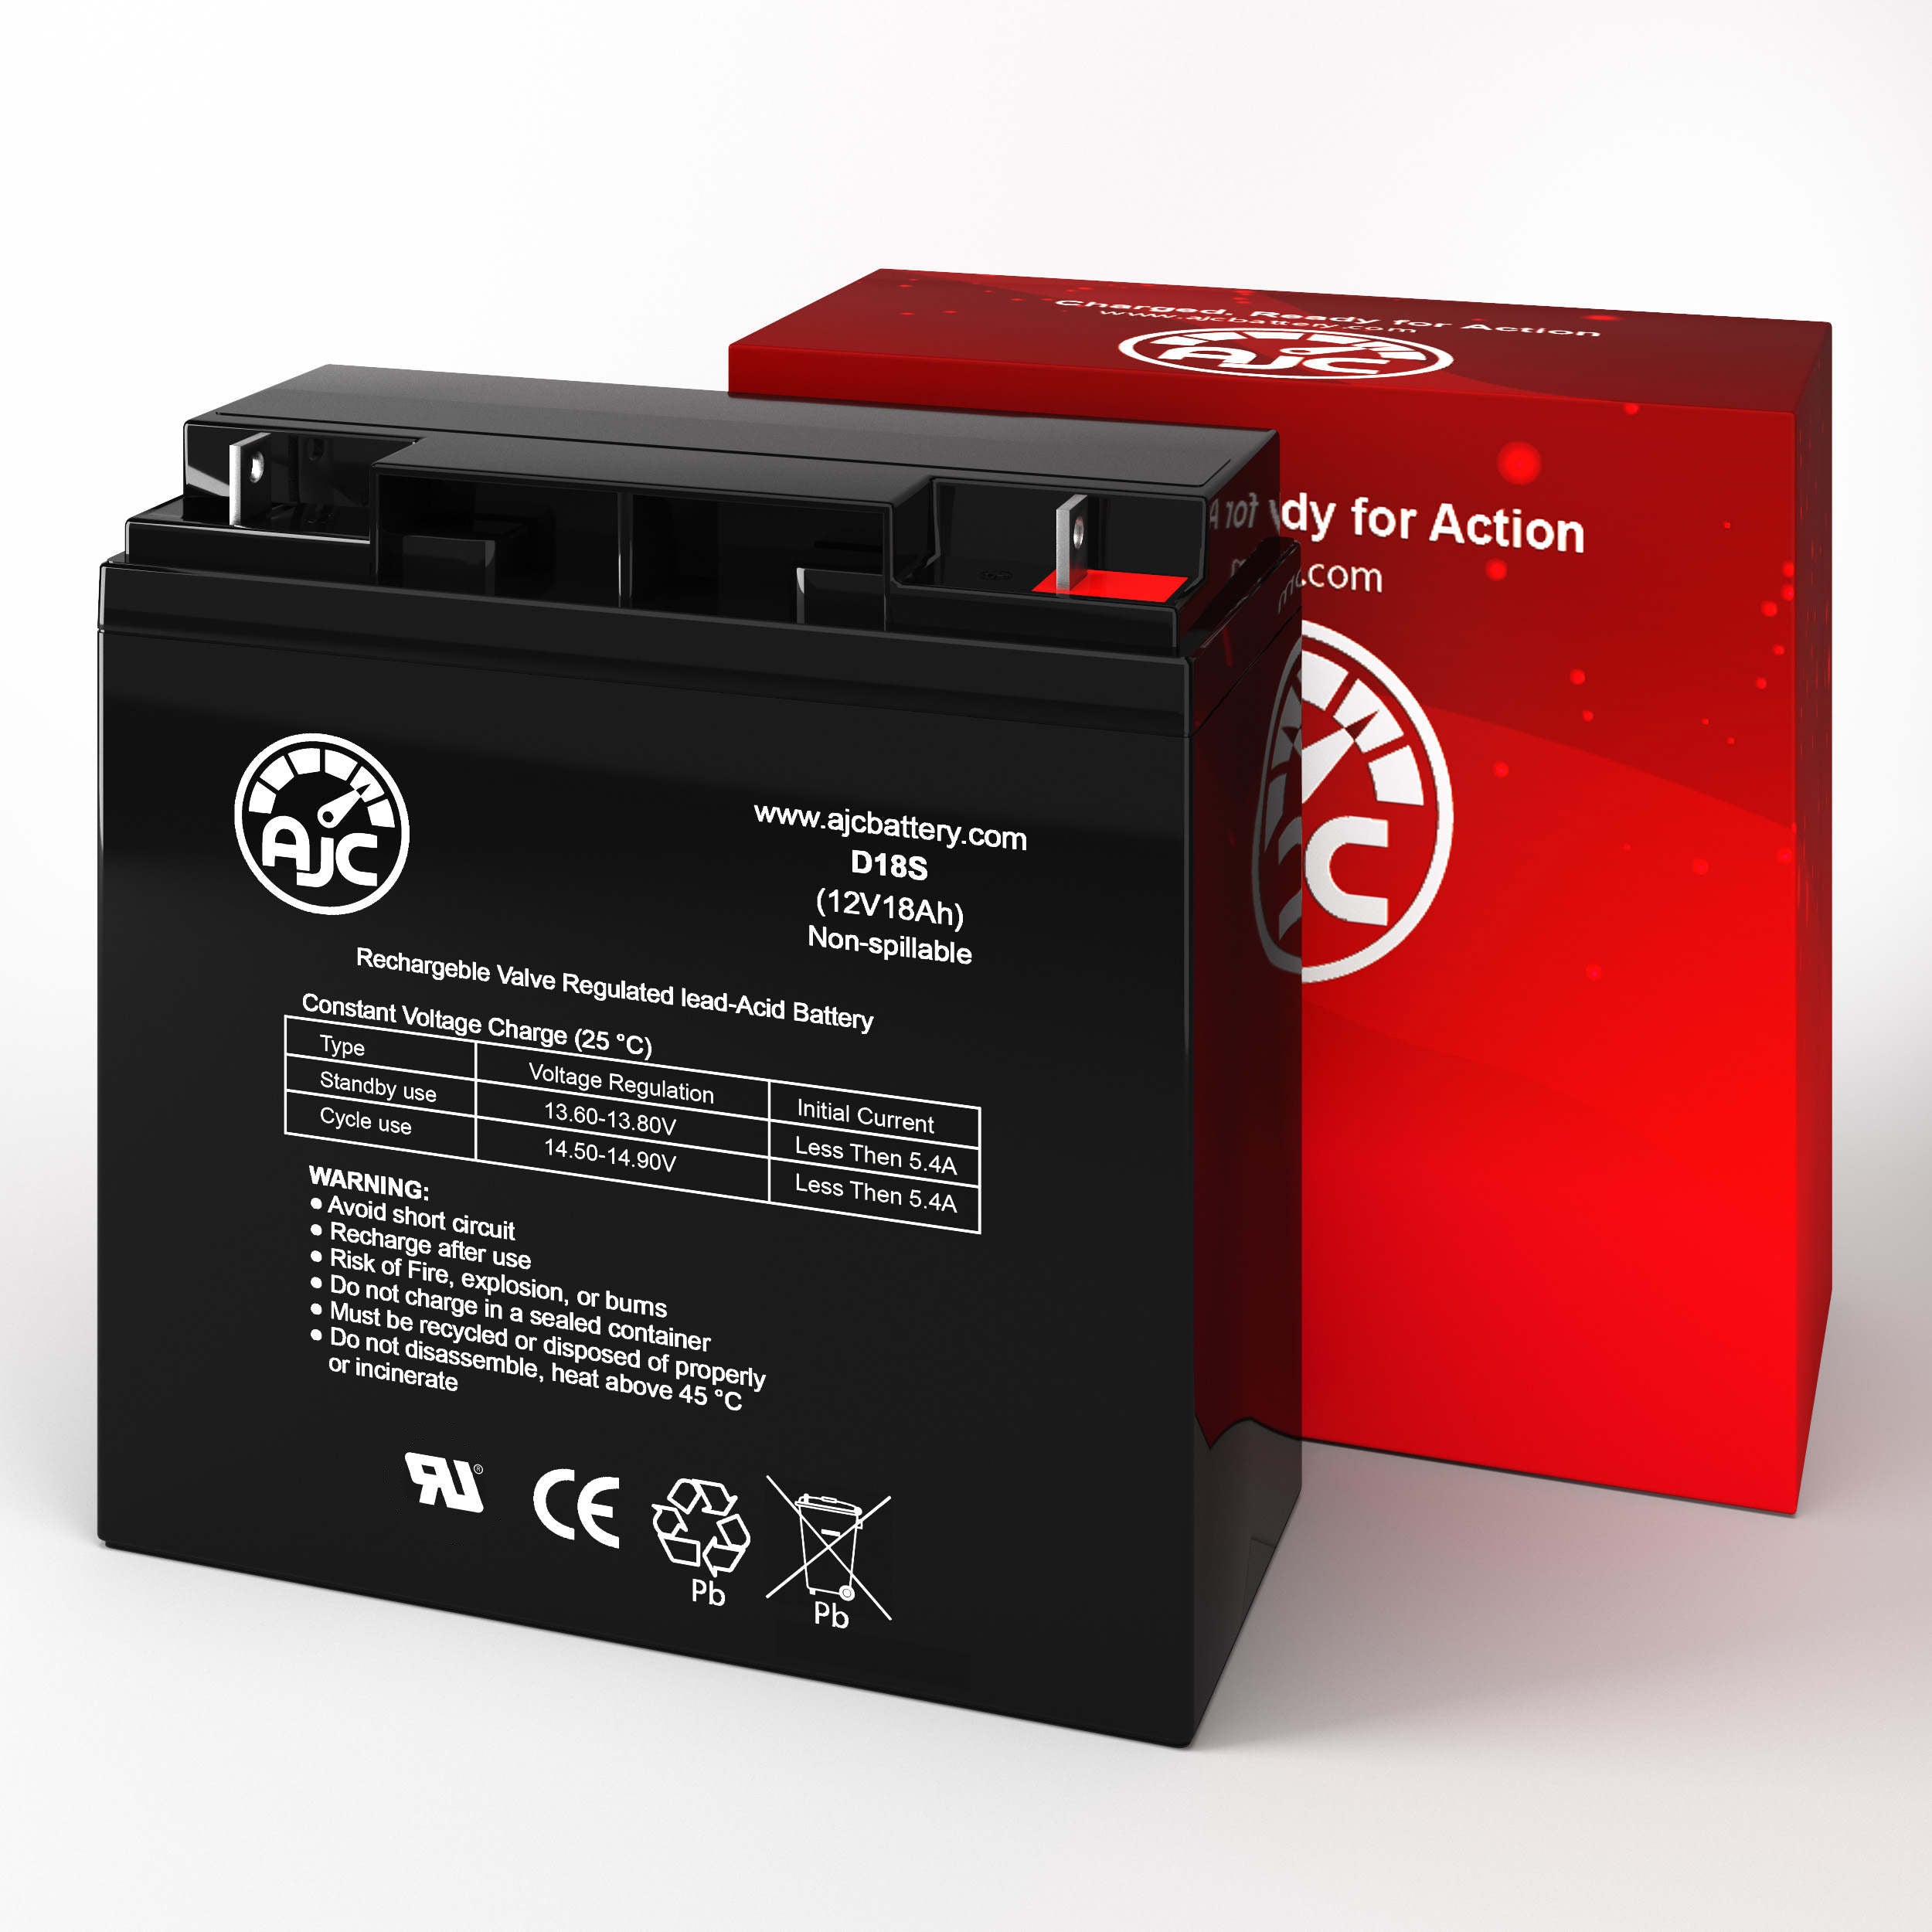 Jump N Carry JNC400 12V 18Ah Jump Starter Battery - This Is an AJC Brand Replacement - image 2 of 6